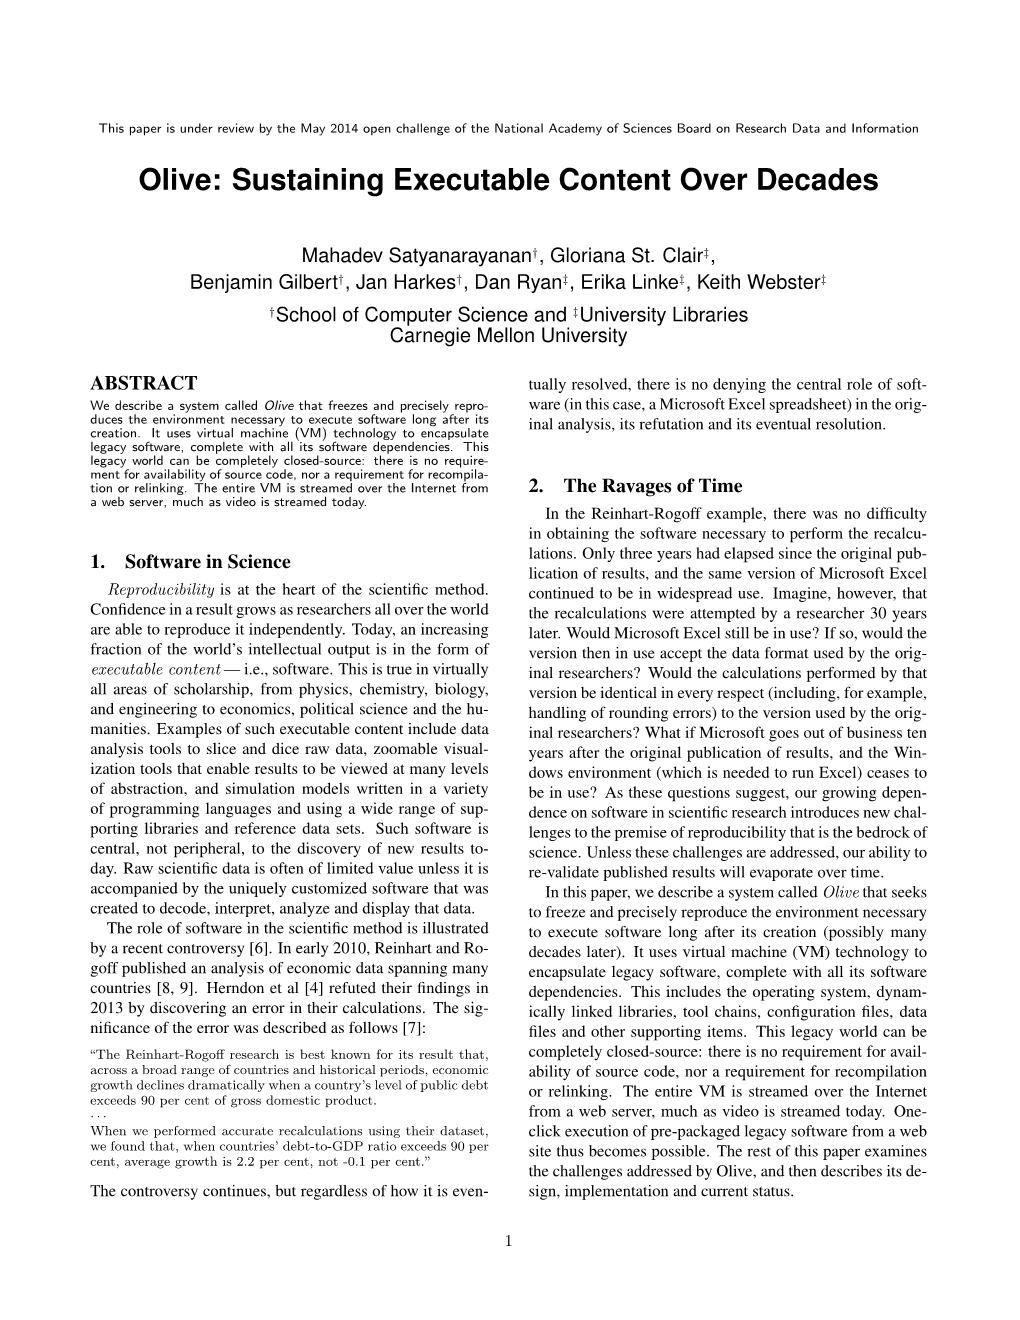 Olive: Sustaining Executable Content Over Decades